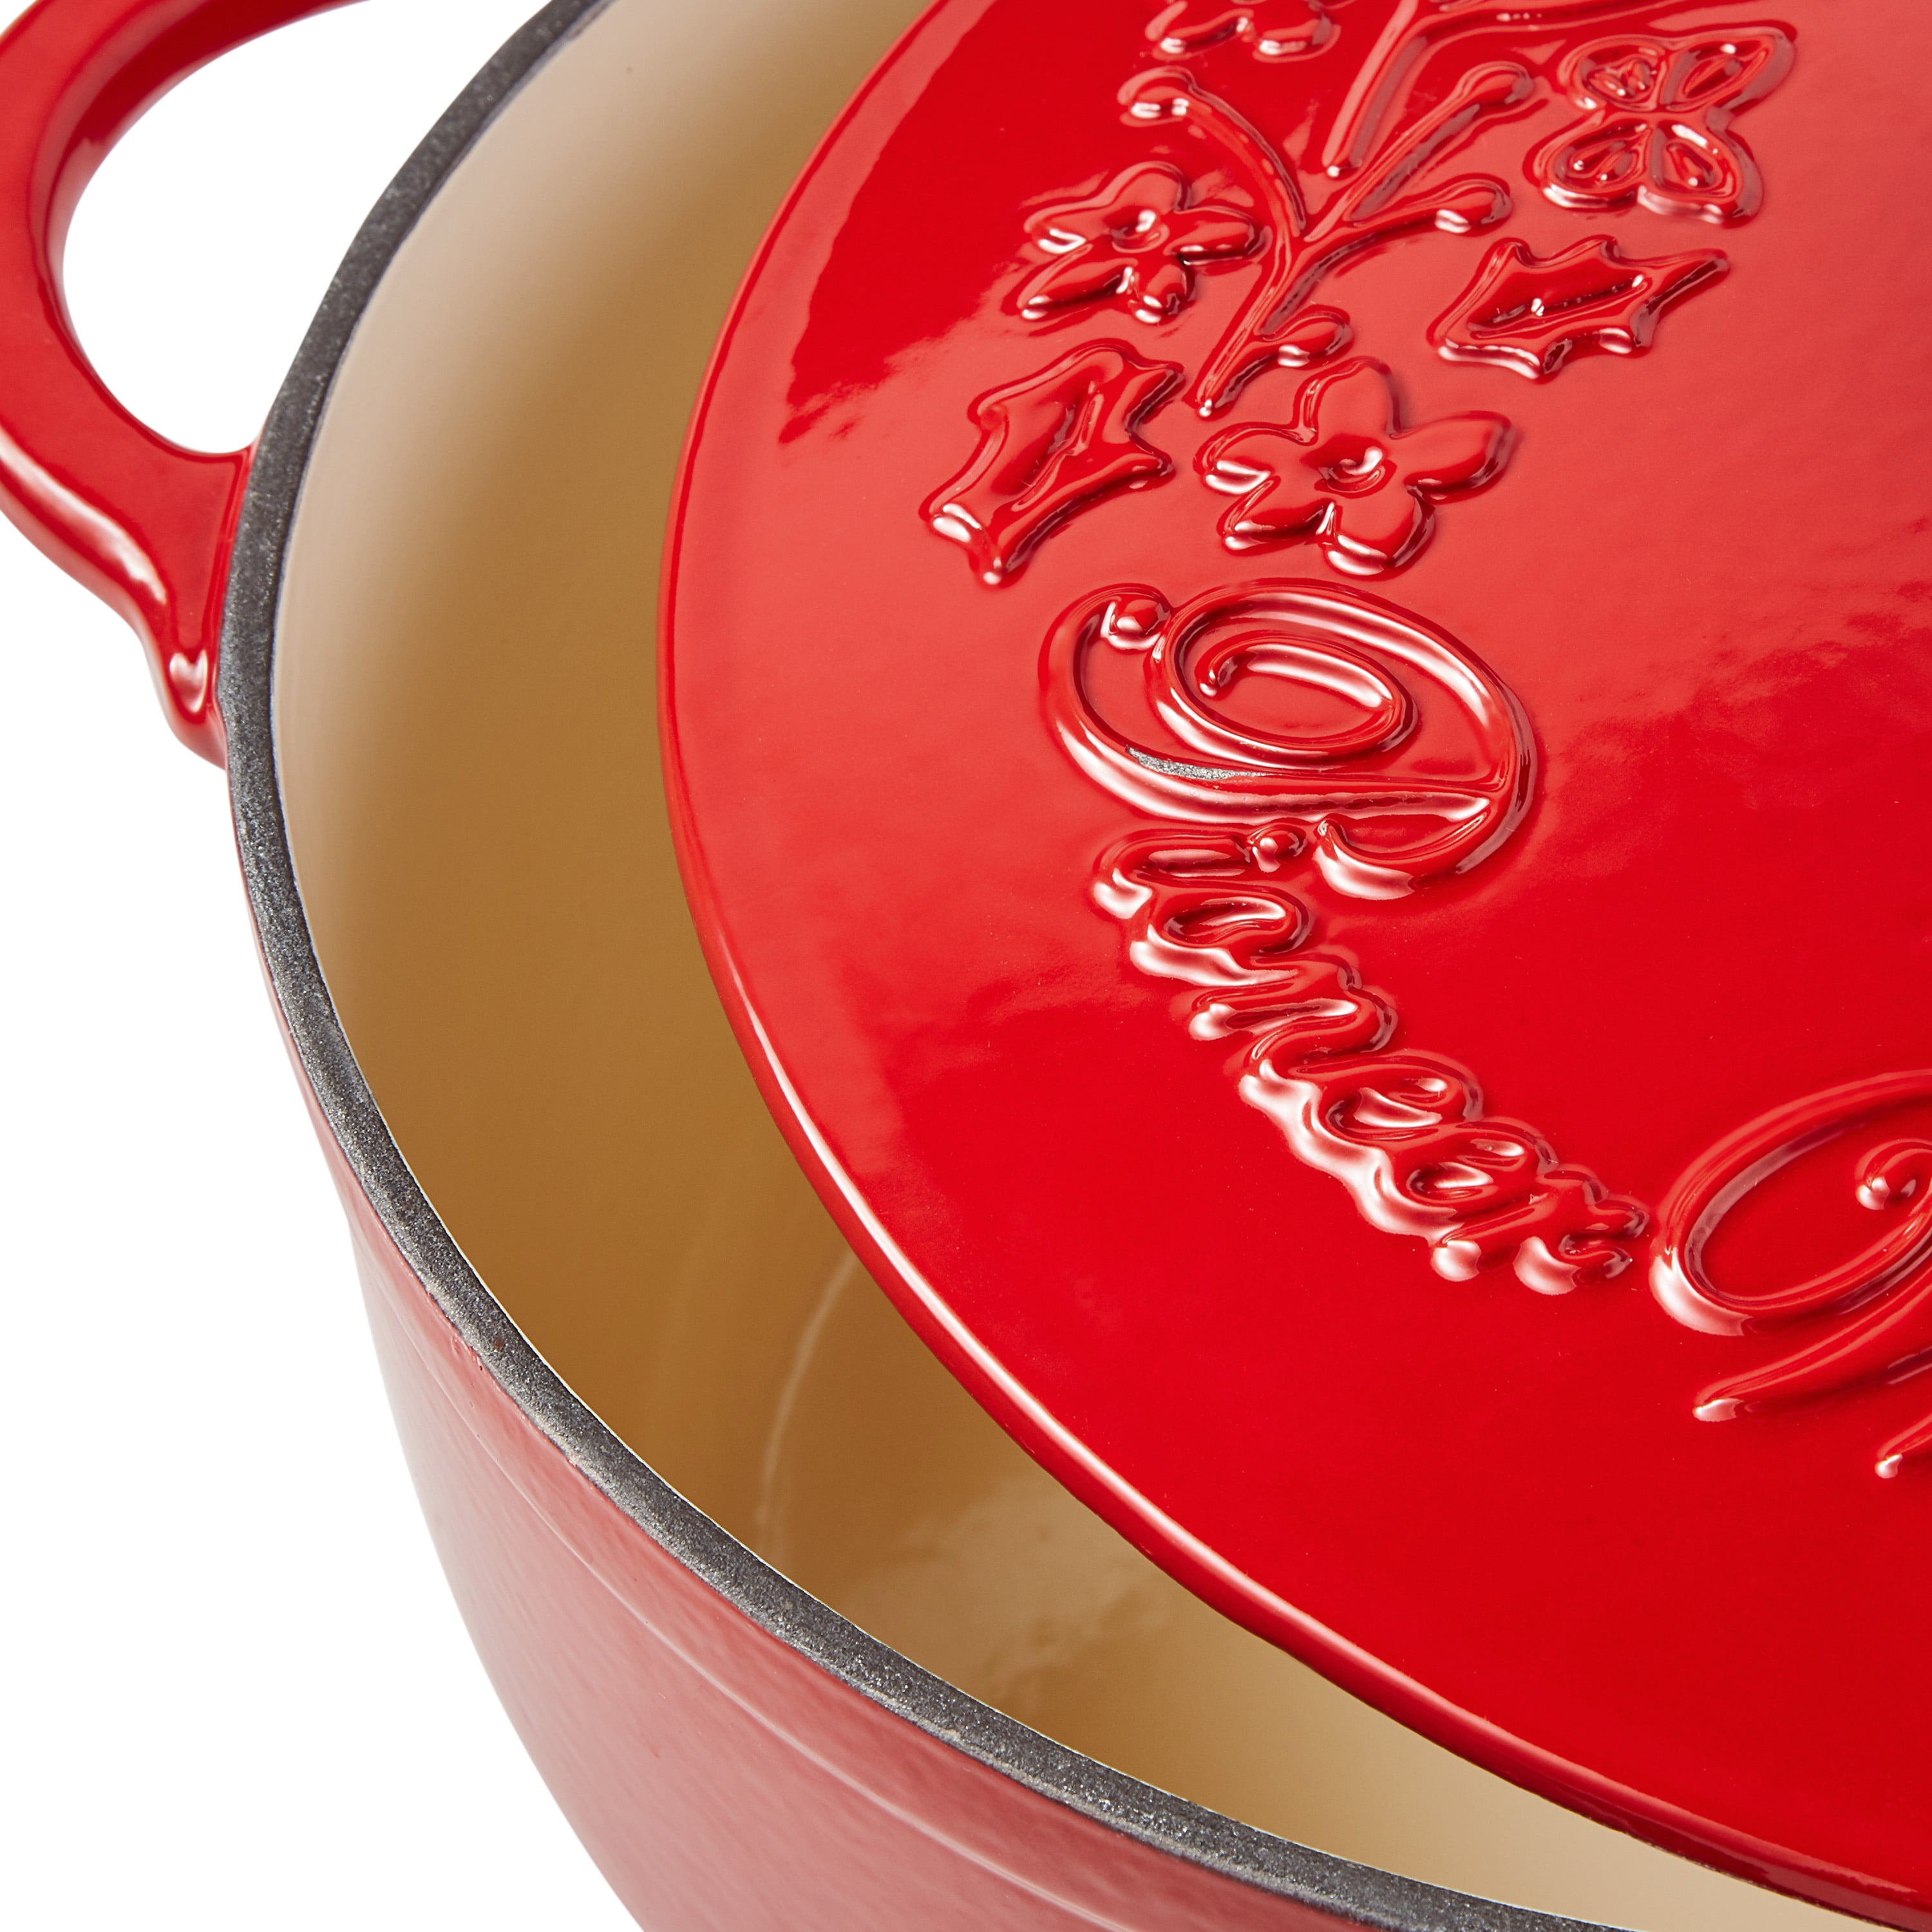 The Pioneer Woman Special Holiday edition Enameled Cast Iron Dutch Oven  with lid